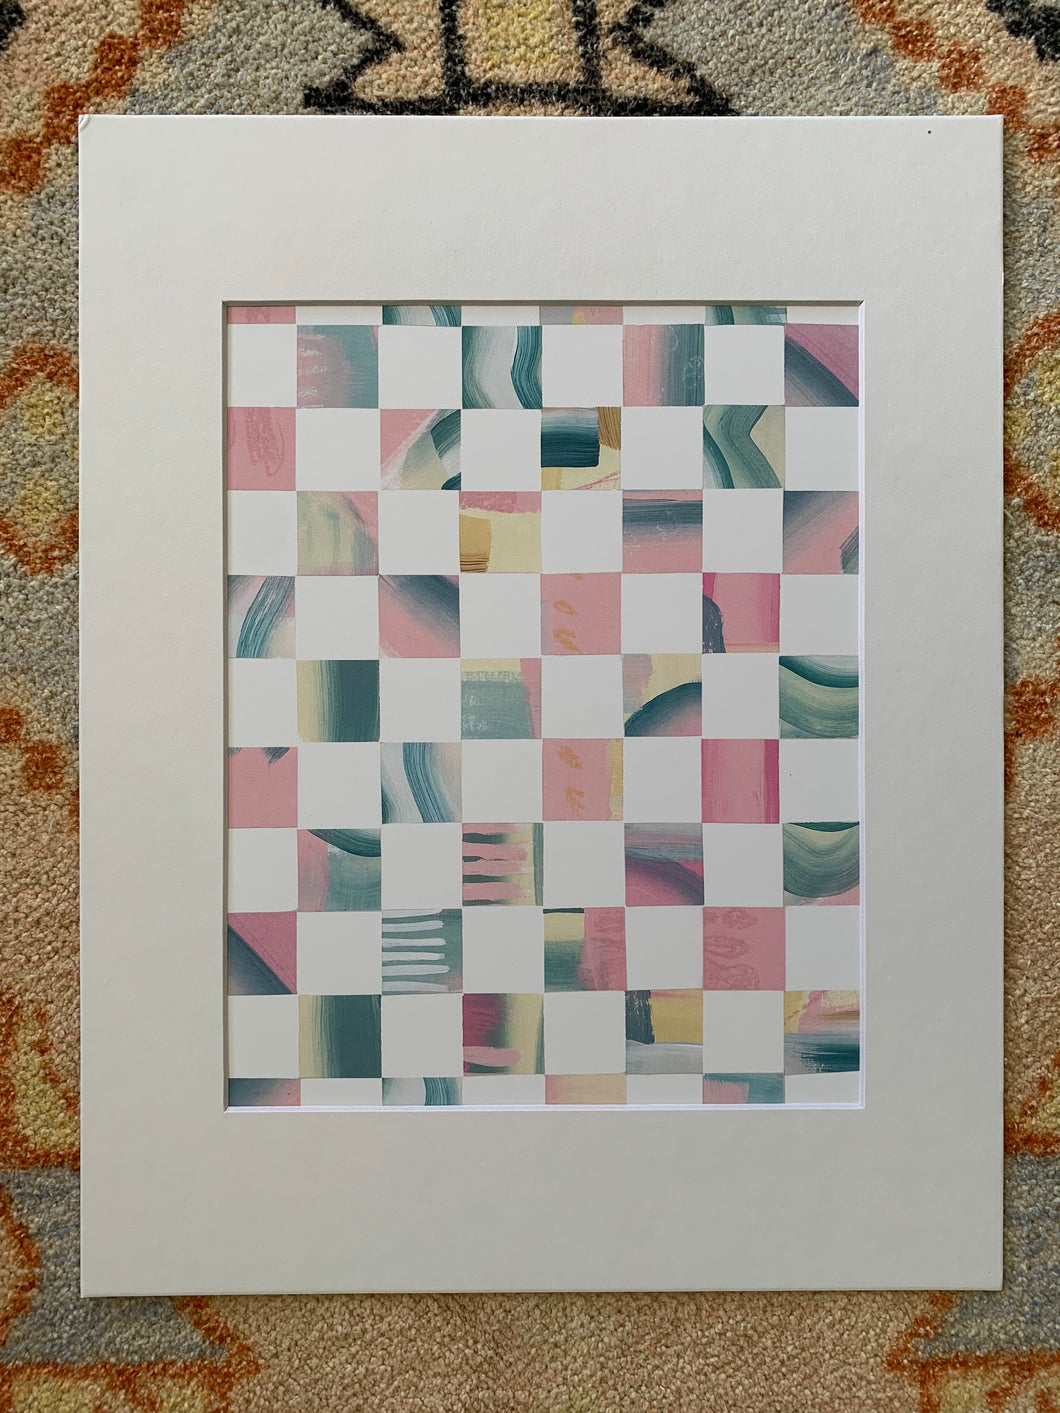 Checkered  (pinkxteal )with mat 11”x14”